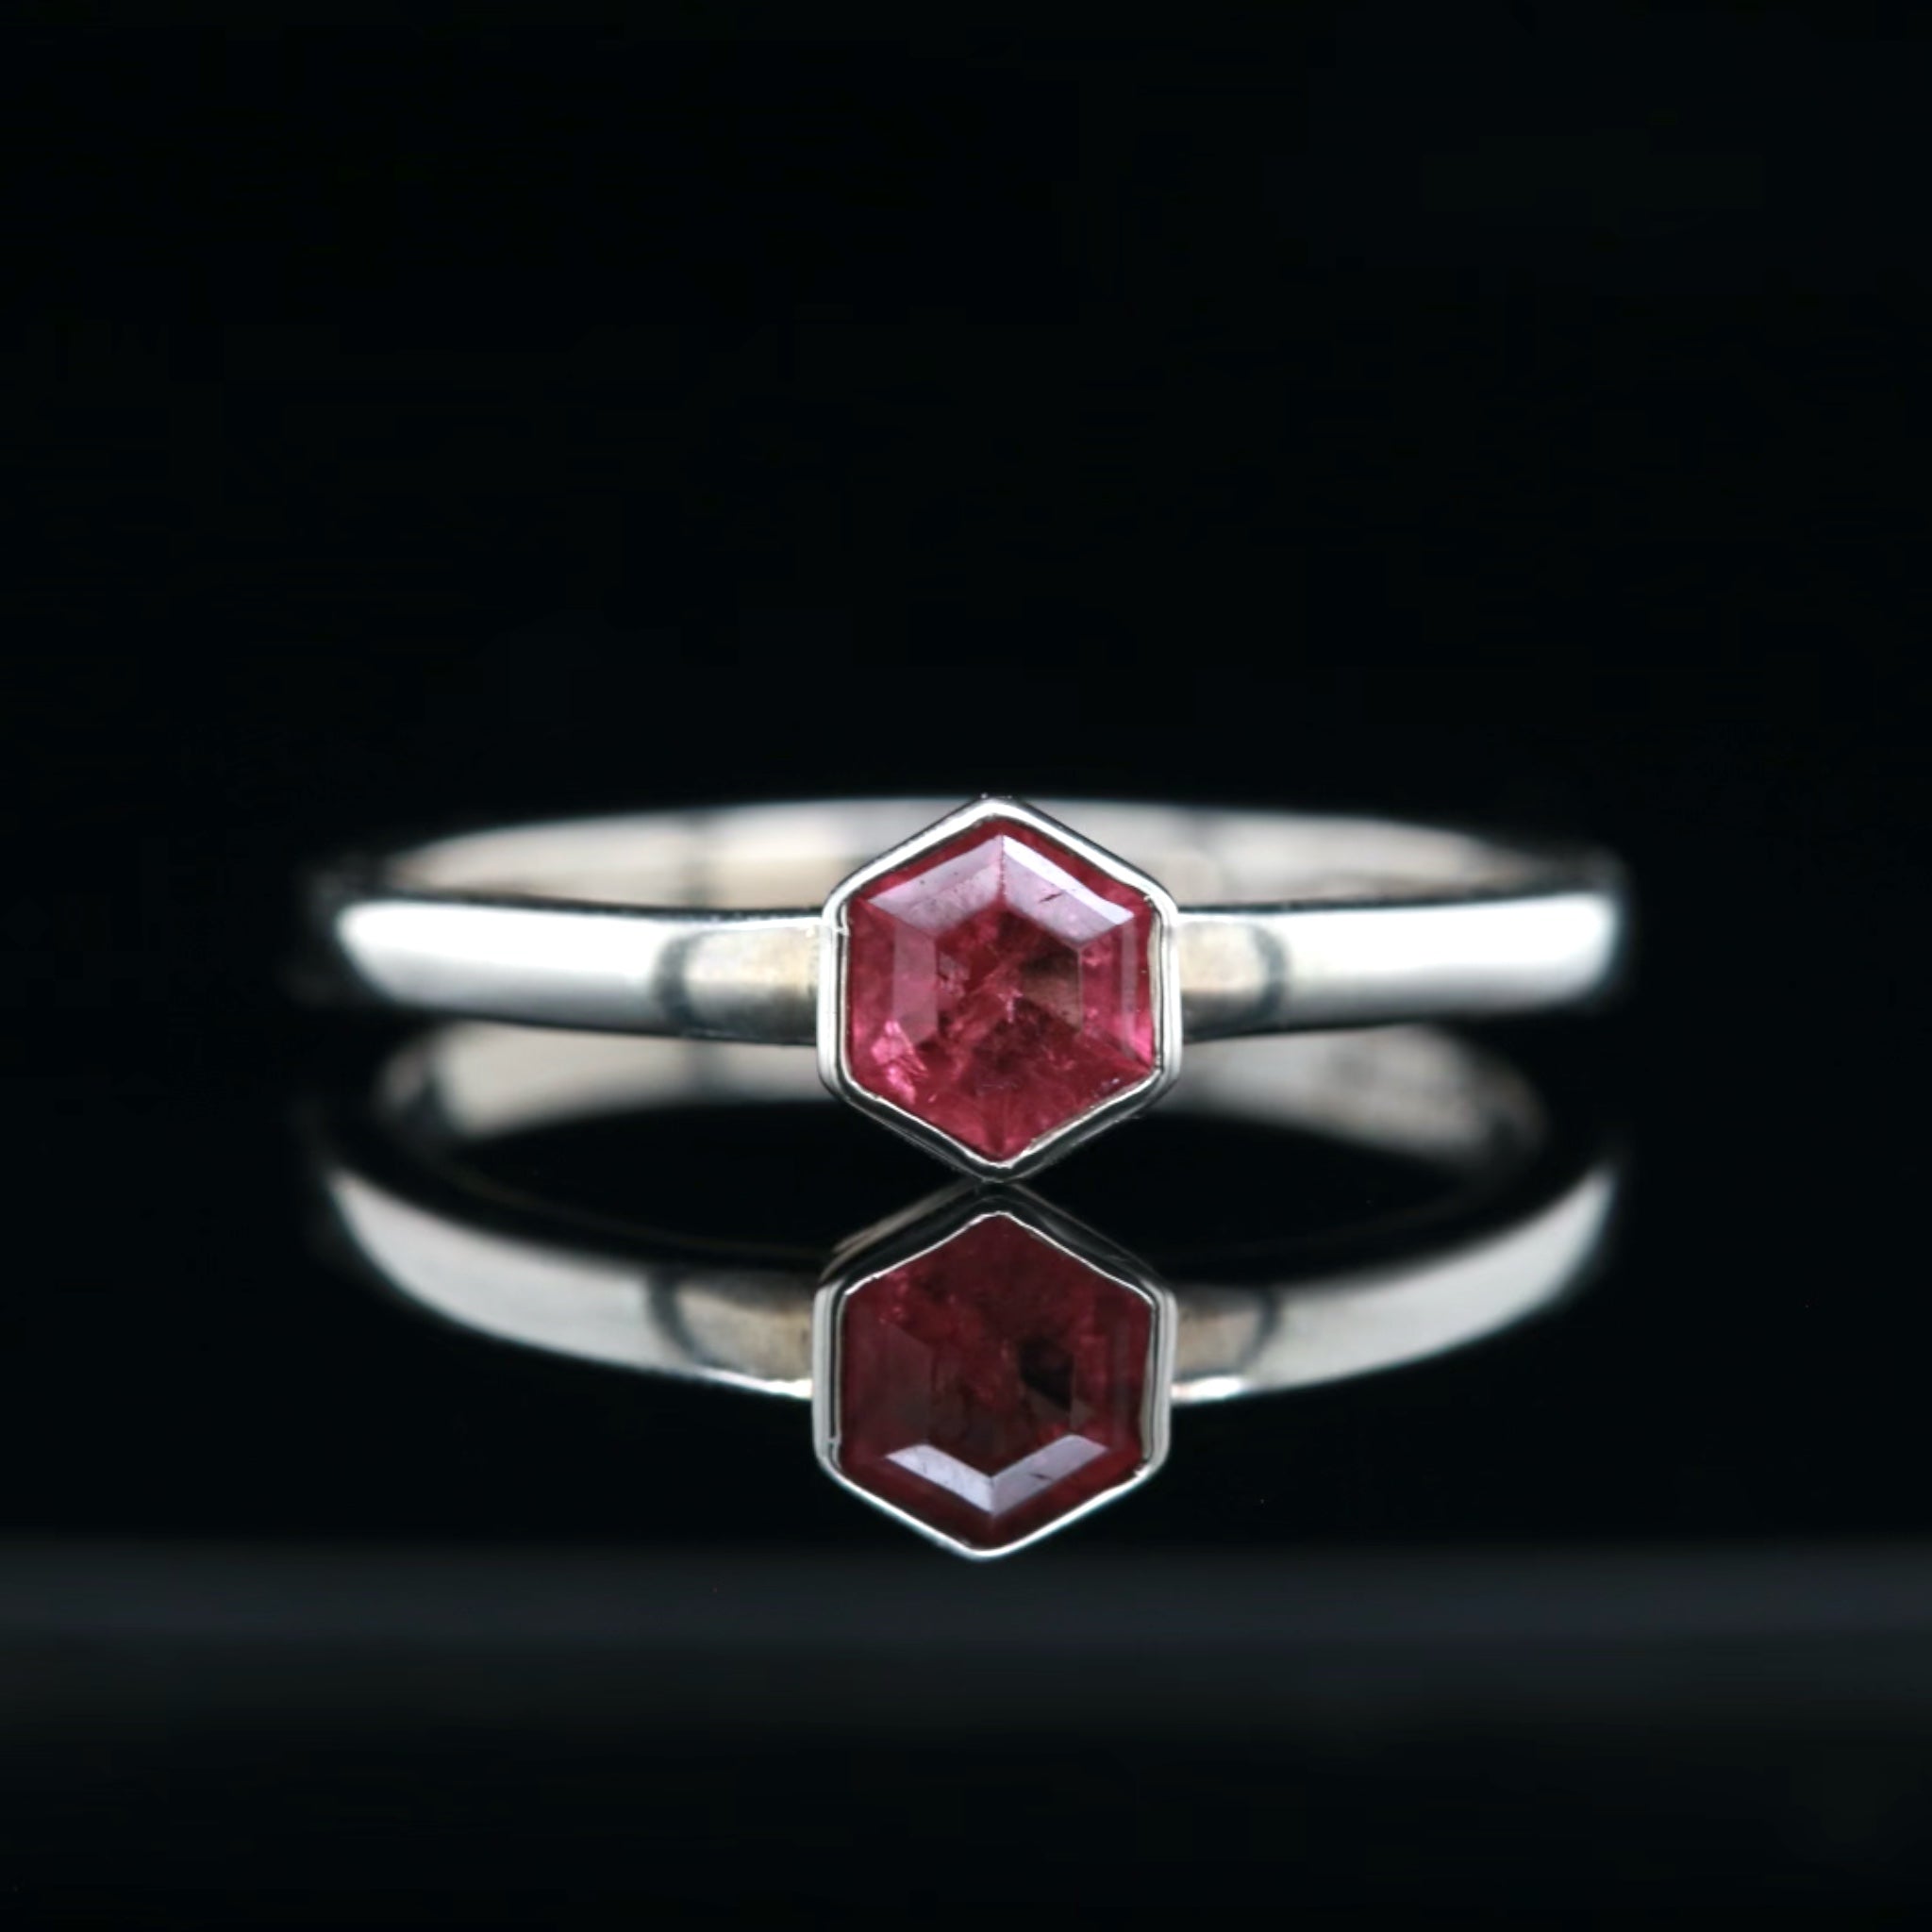 Serena Ring with Hexagon-Cut Pink Tourmaline in Sterling Silver